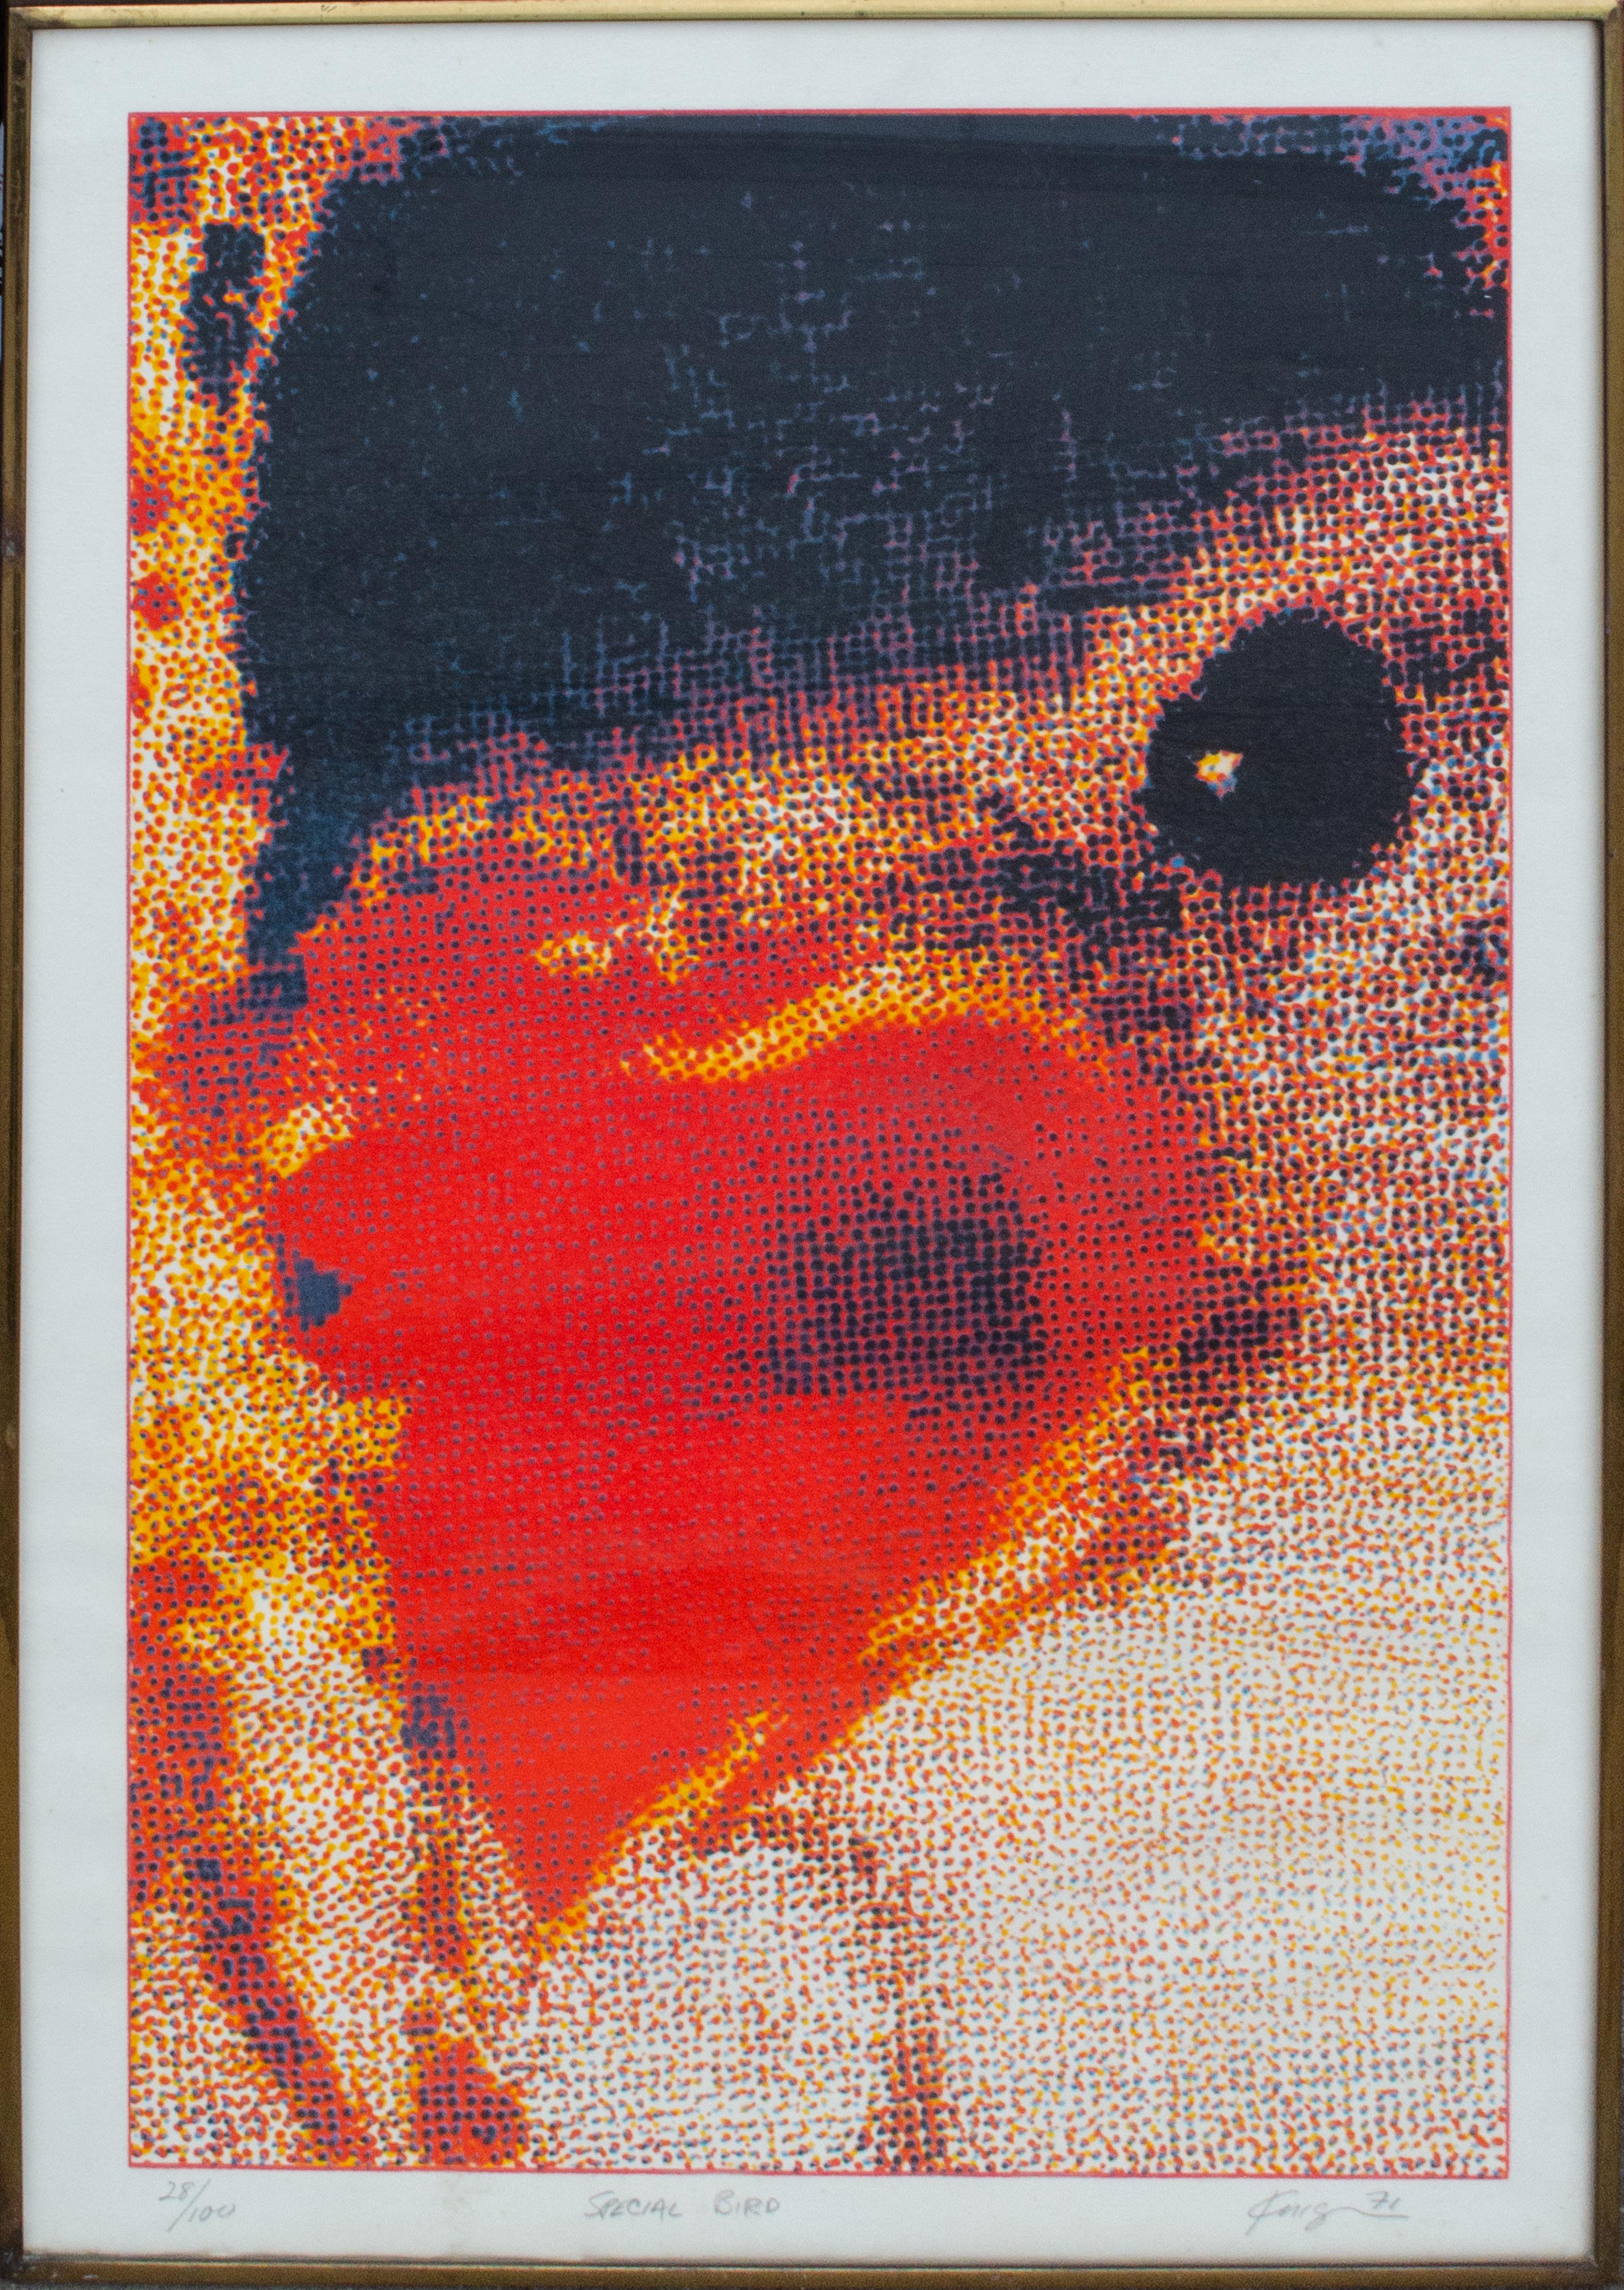 Michael Knigin (American, b. 1942)
Special Bird, 1971
Screenprint
Sight: 27 1/4 x 17 1/2 in.
Framed: 31 x 20 1/4 x 1 in.
Signed, titled, numbered bottom
Edition 28/100, Printed by Chiron Press Inc.

Period Kulicke frame

Another edition in the